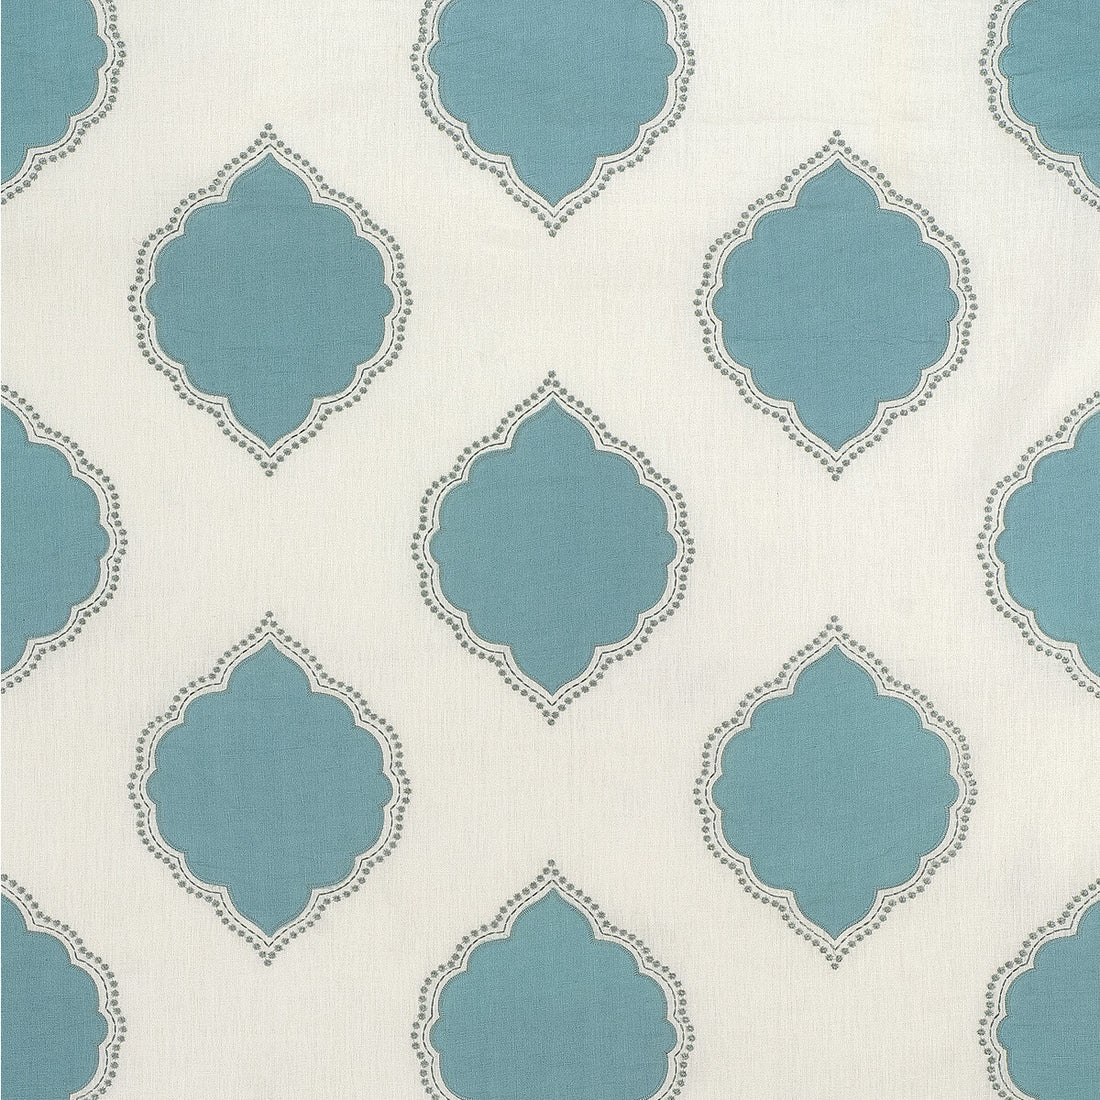 Kravet Couture fabric in 33422-1511 color - pattern 33422.1511.0 - by Kravet Couture in the Inspirations collection